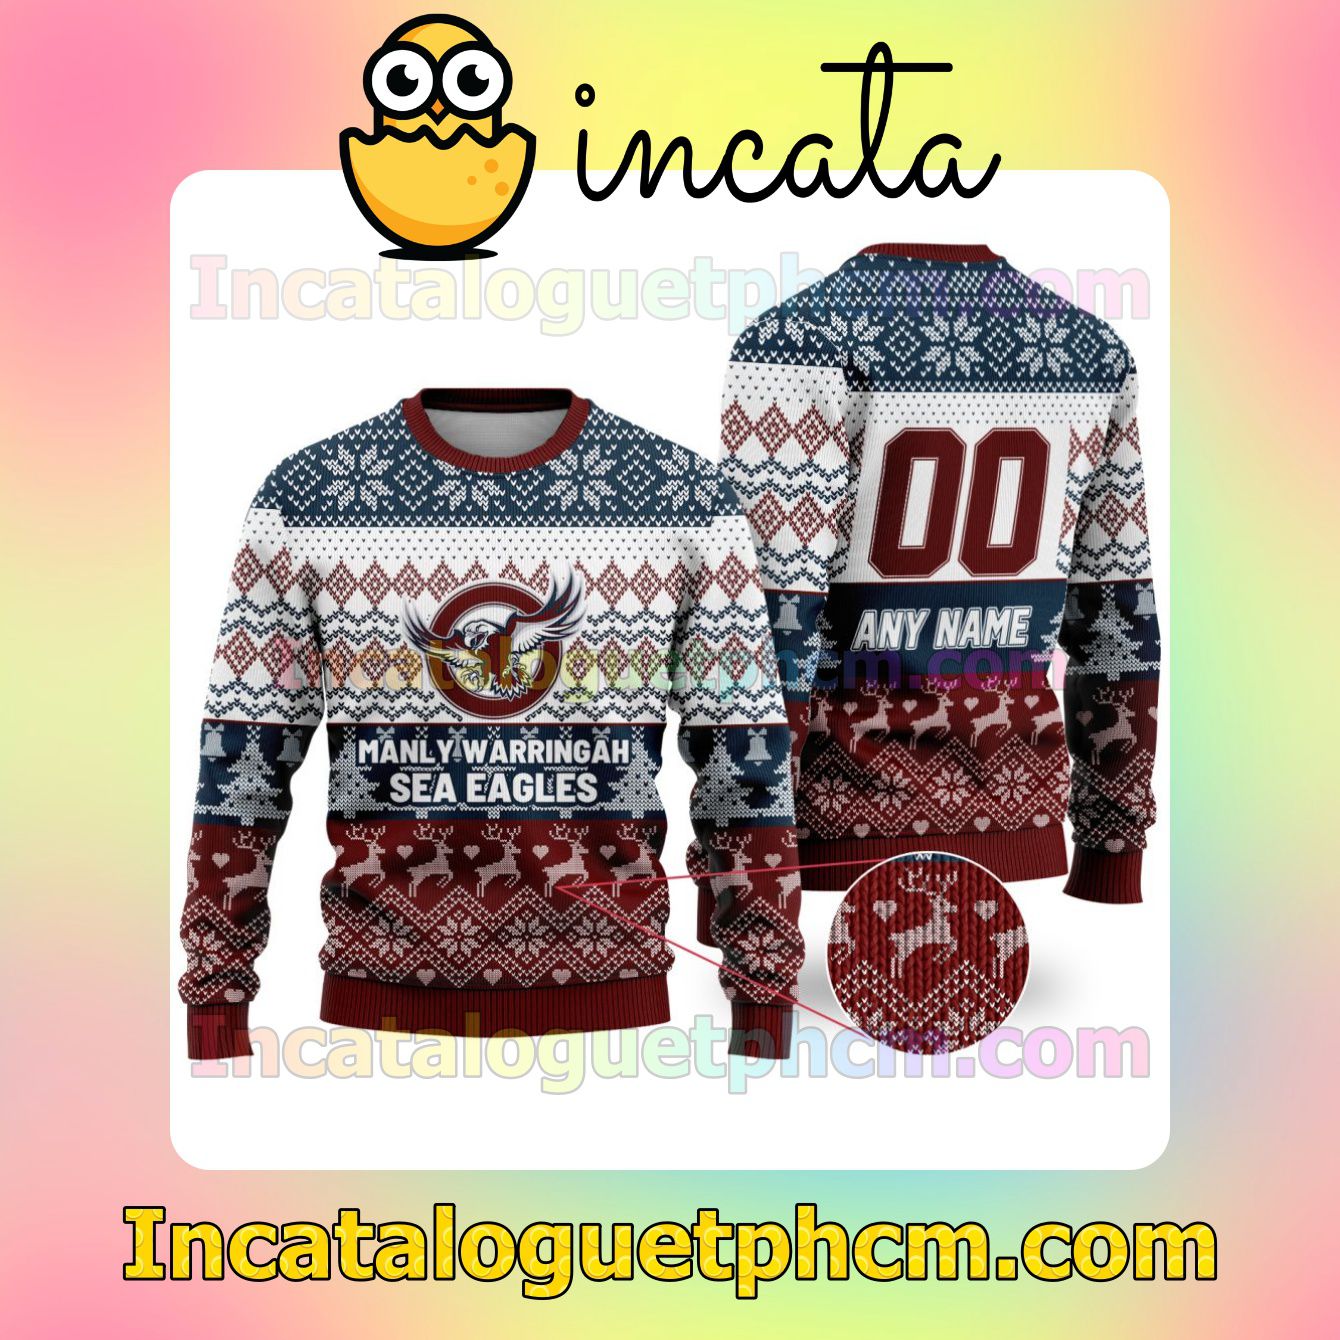 NRL Manly Warringah Sea Eagles Ugly Christmas Jumper Sweater